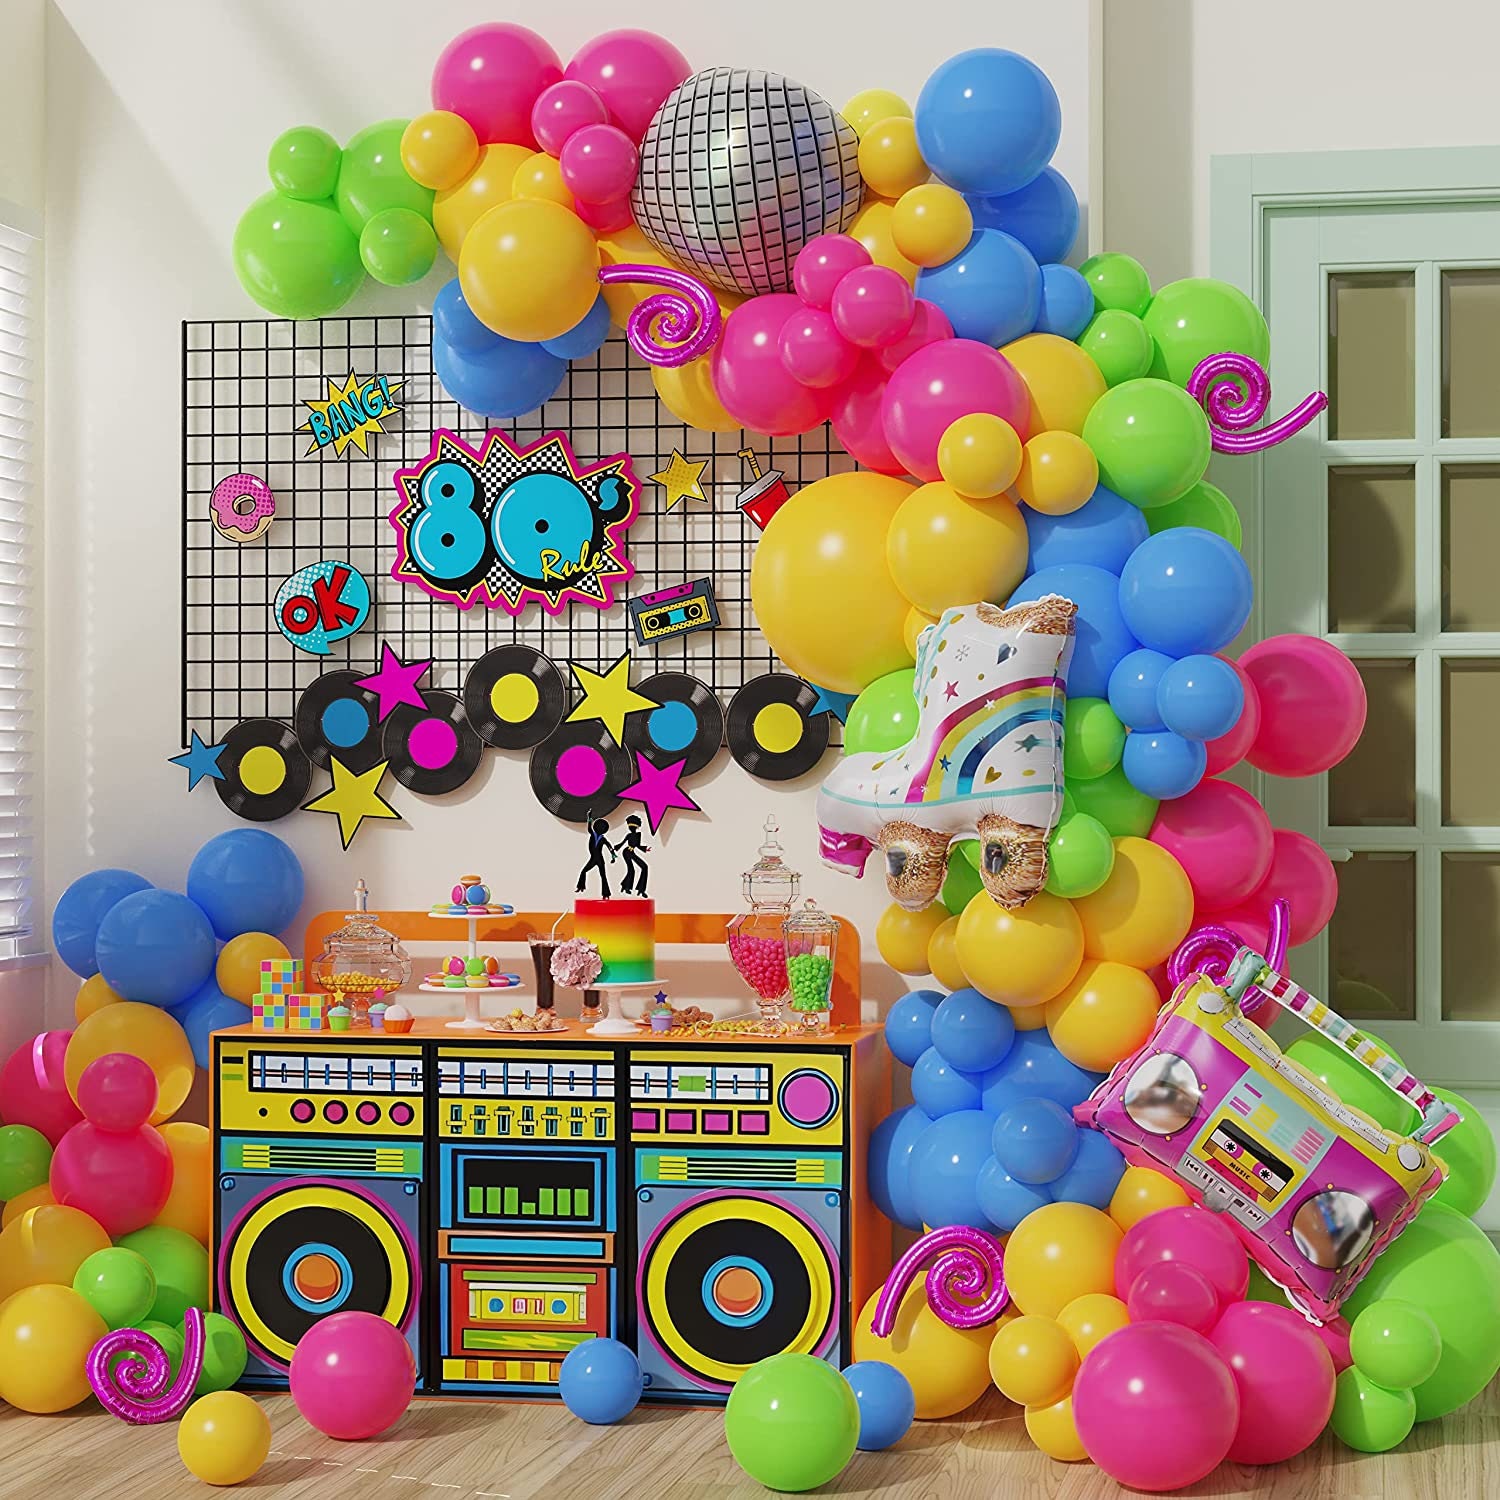 Ultimate guide to 80's decorations party ideas for a blast from the ...